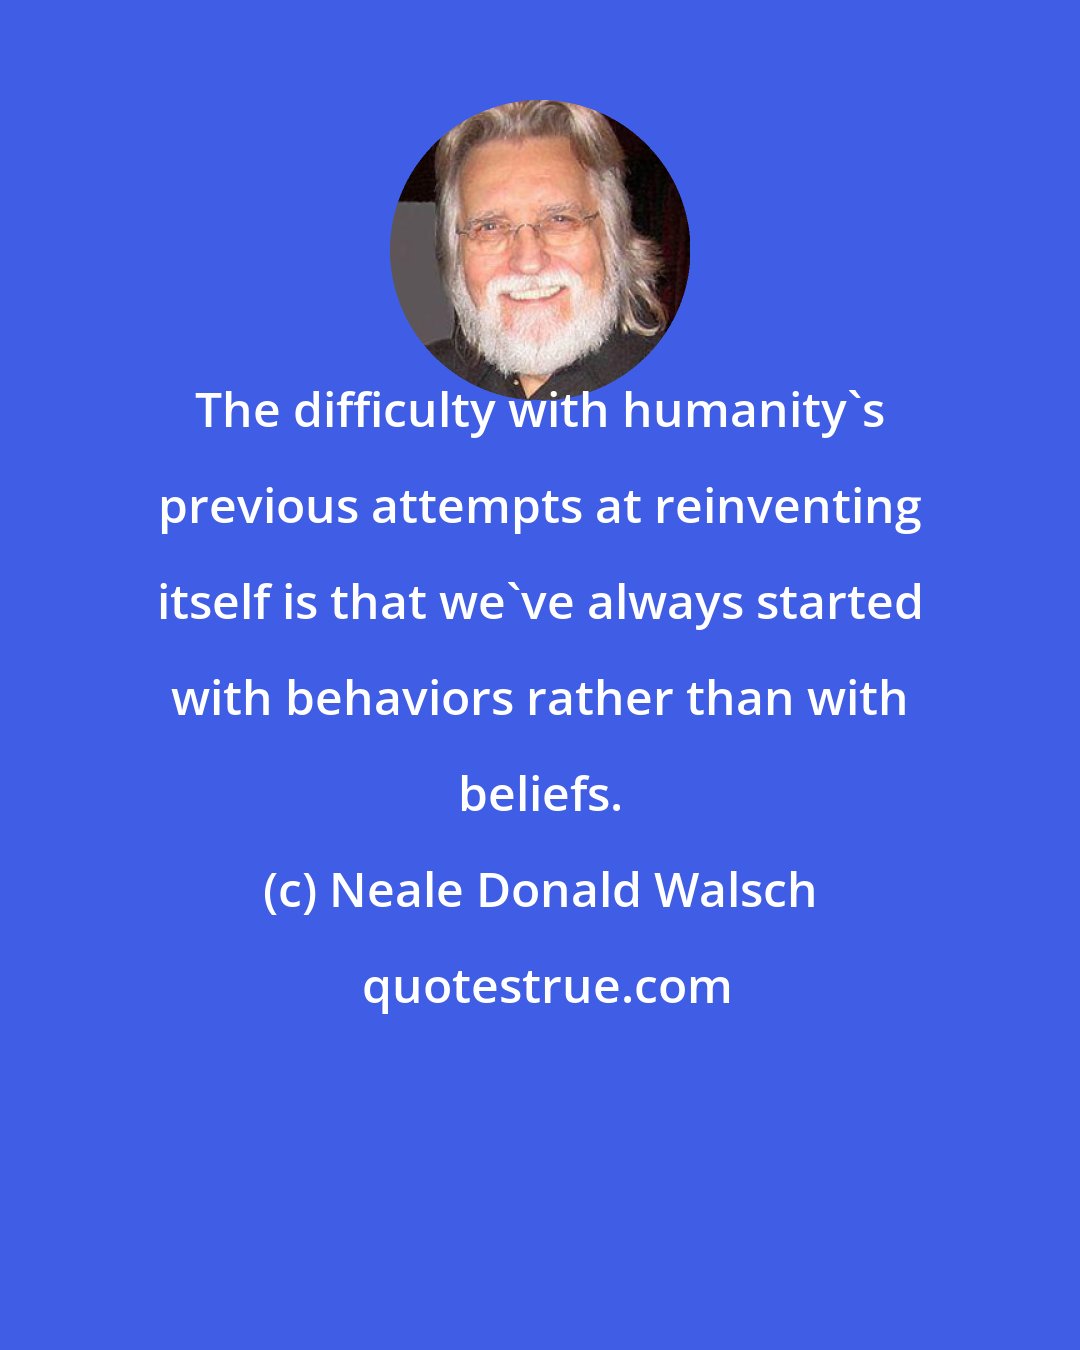 Neale Donald Walsch: The difficulty with humanity's previous attempts at reinventing itself is that we've always started with behaviors rather than with beliefs.